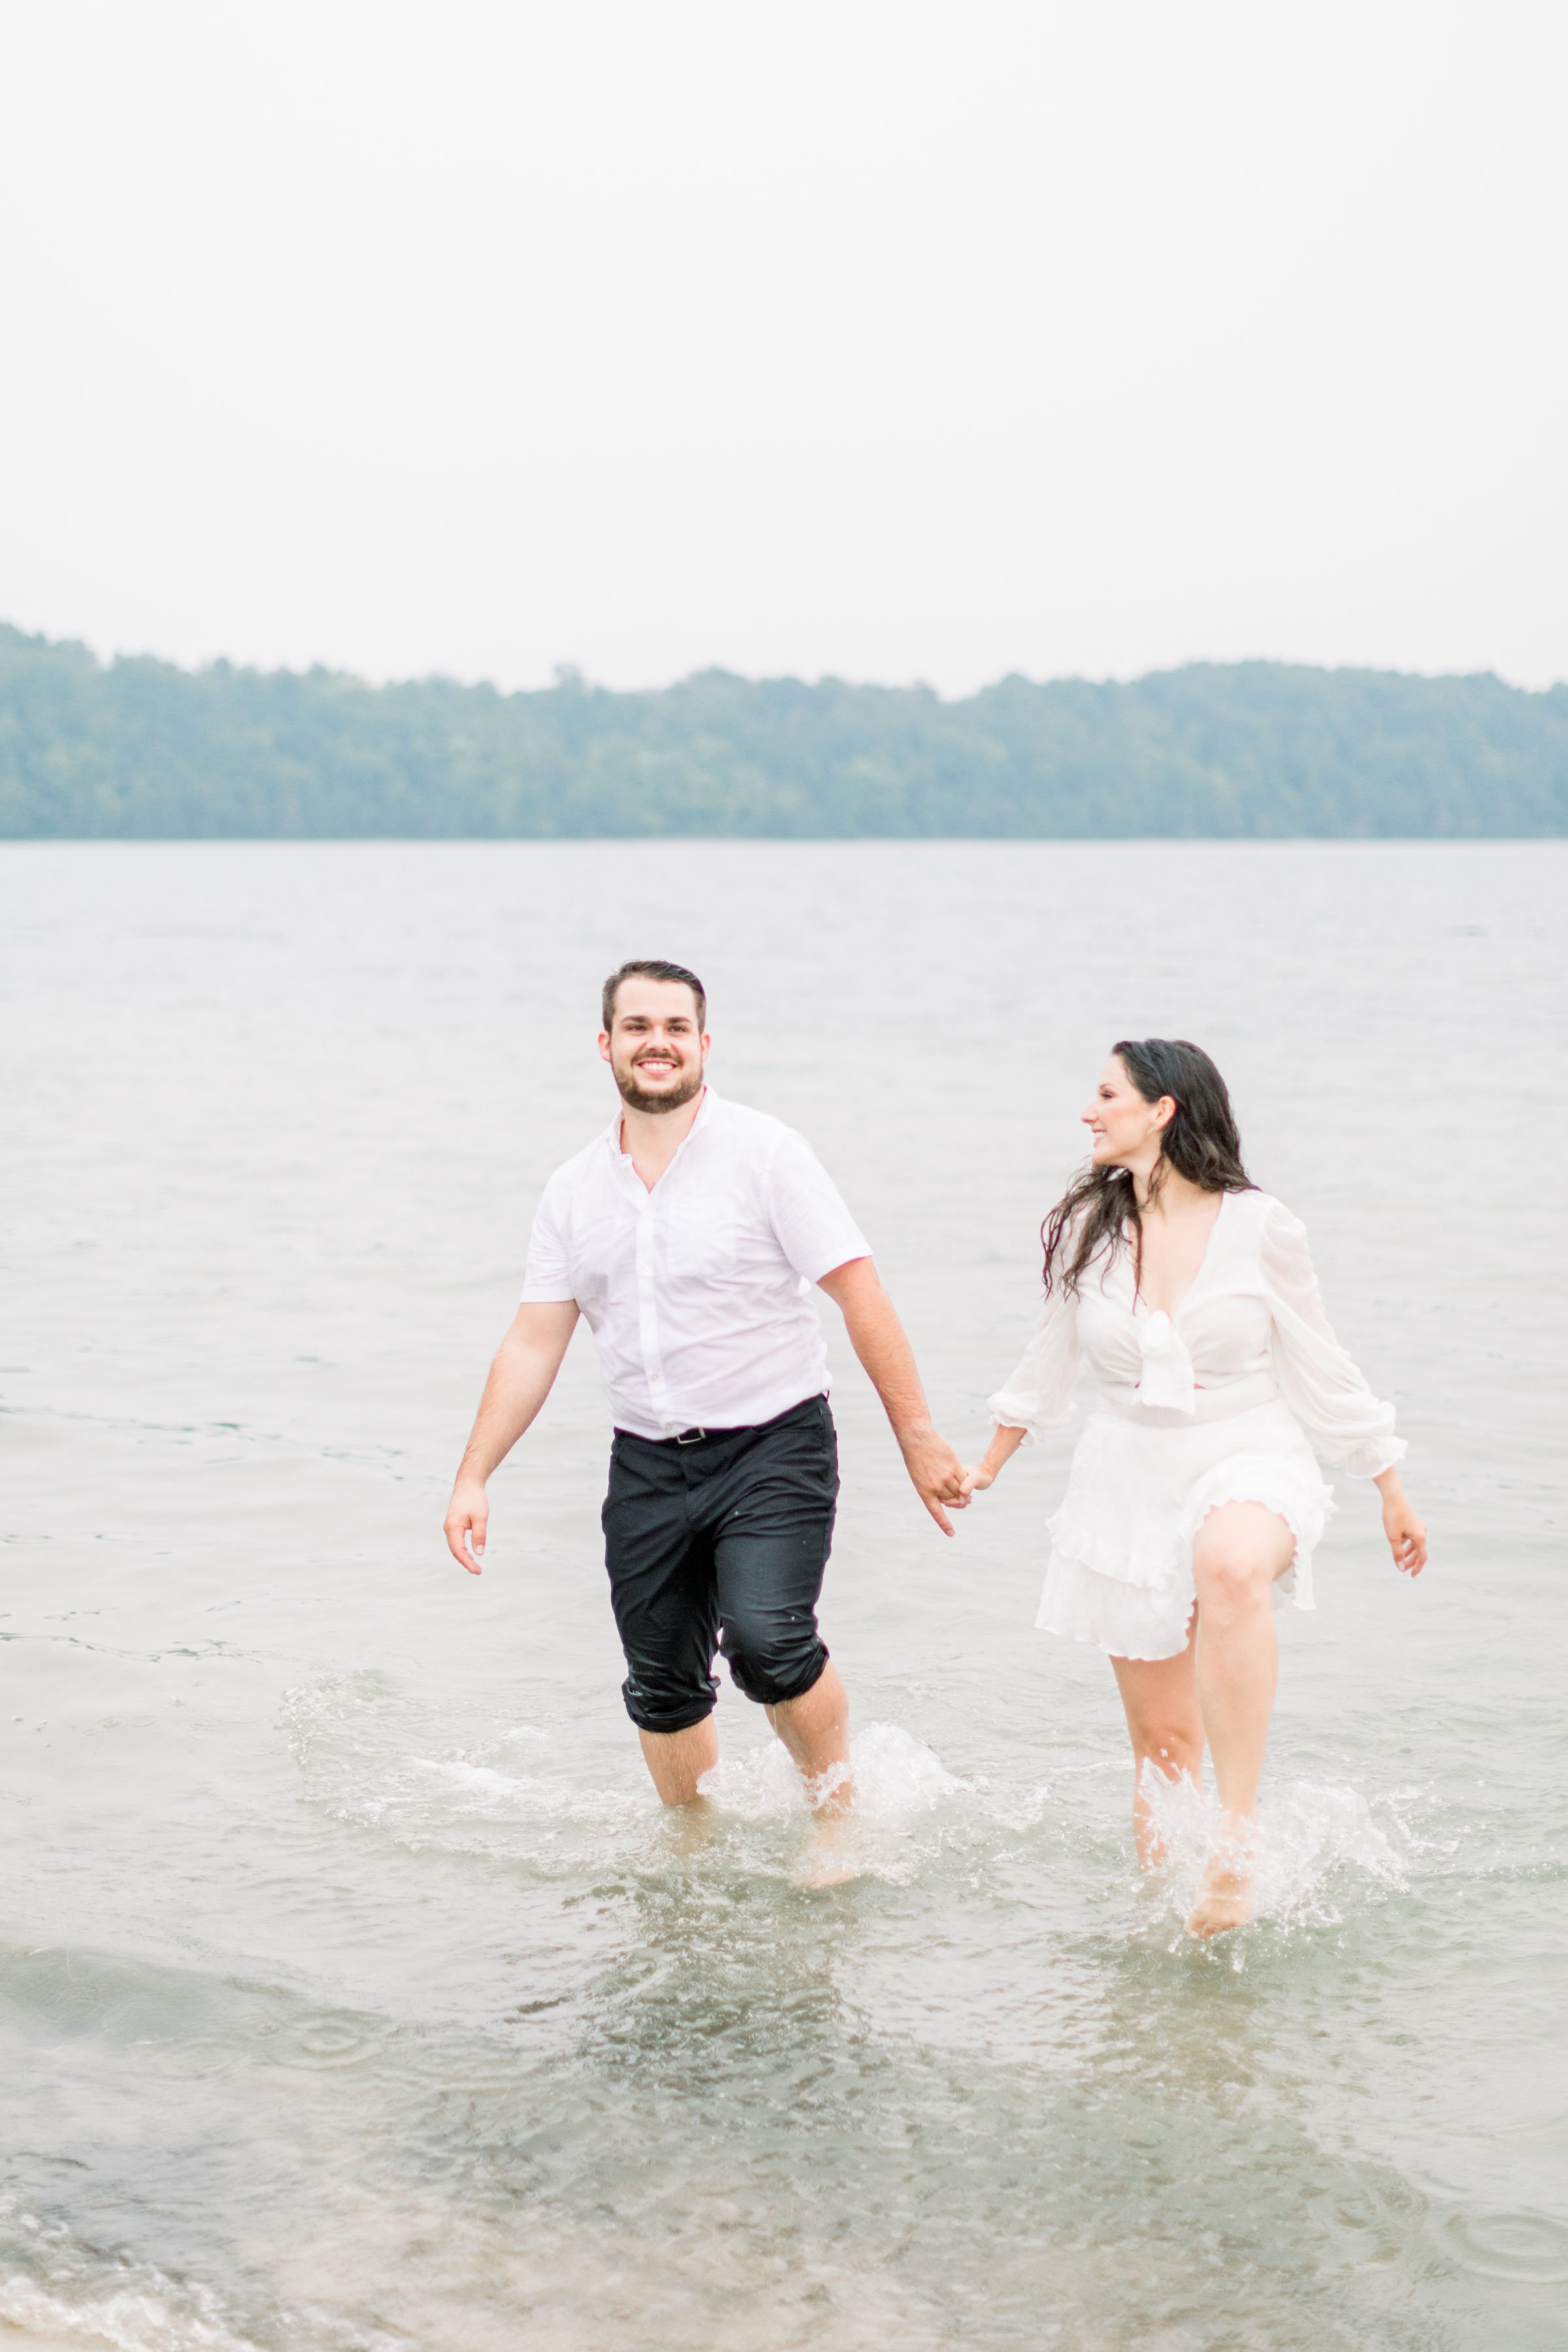  Hand-in-hand engaged couple walk out of the lake together captured by Chelsea Mason Photography. hand in hand lake portrait #Kingstonengagement #GrassCreekParkPortraits #Ontarioengagementphotographers #Chelseamasonphotography #Chelseamasonengagement